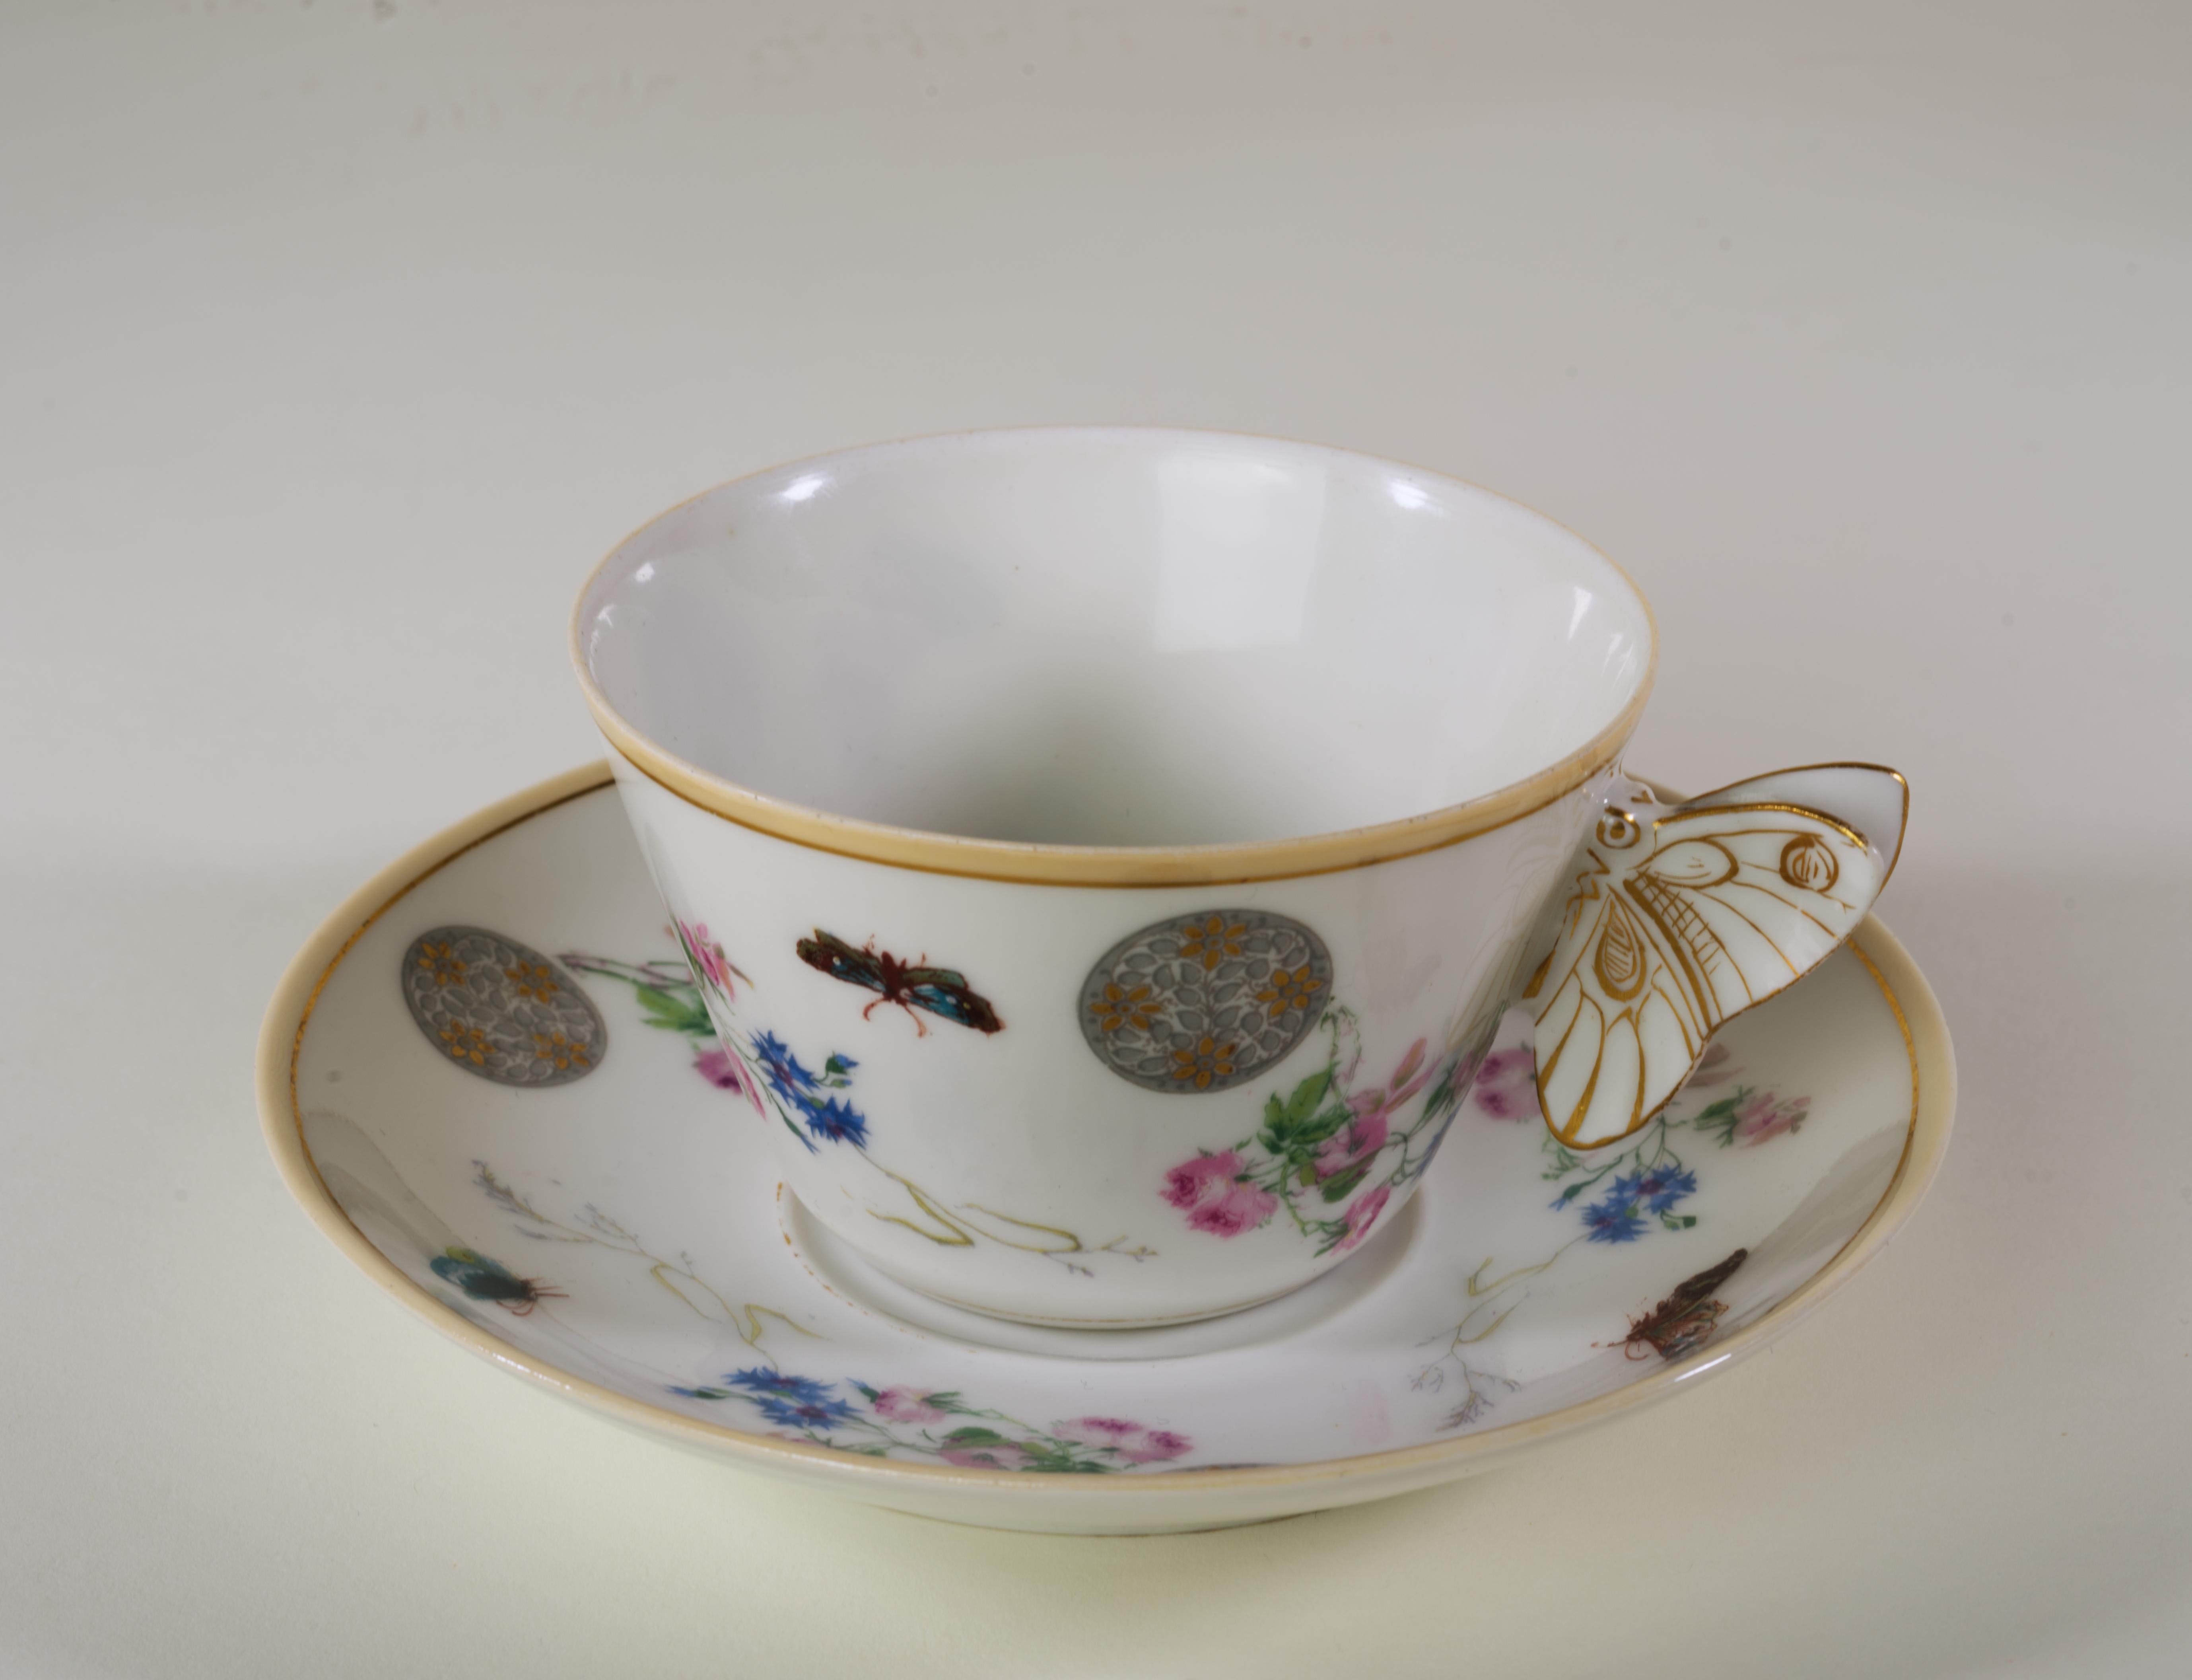  Cup and saucer set by Haviland & Cie is decorated in Aesthetic style, combining elements of 3 different patterns. Meadow Visitors butterflies, placed between Bracquemond style sprays of pink roses and blue cornflowers, are accentuated with grey and